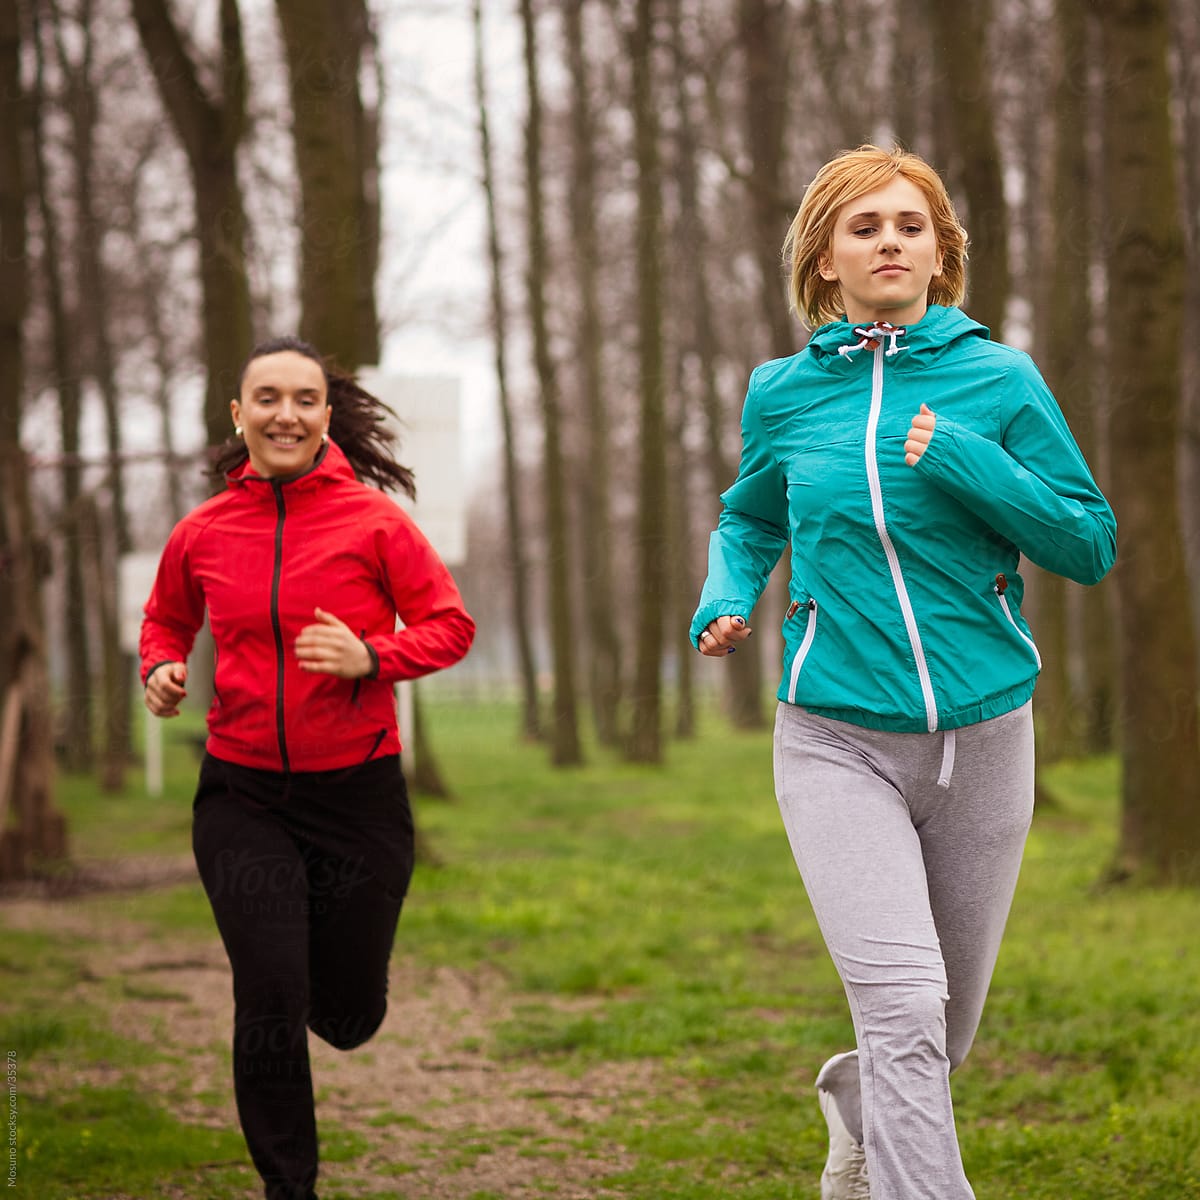 Two women jogging in the park on a rainy spring day.